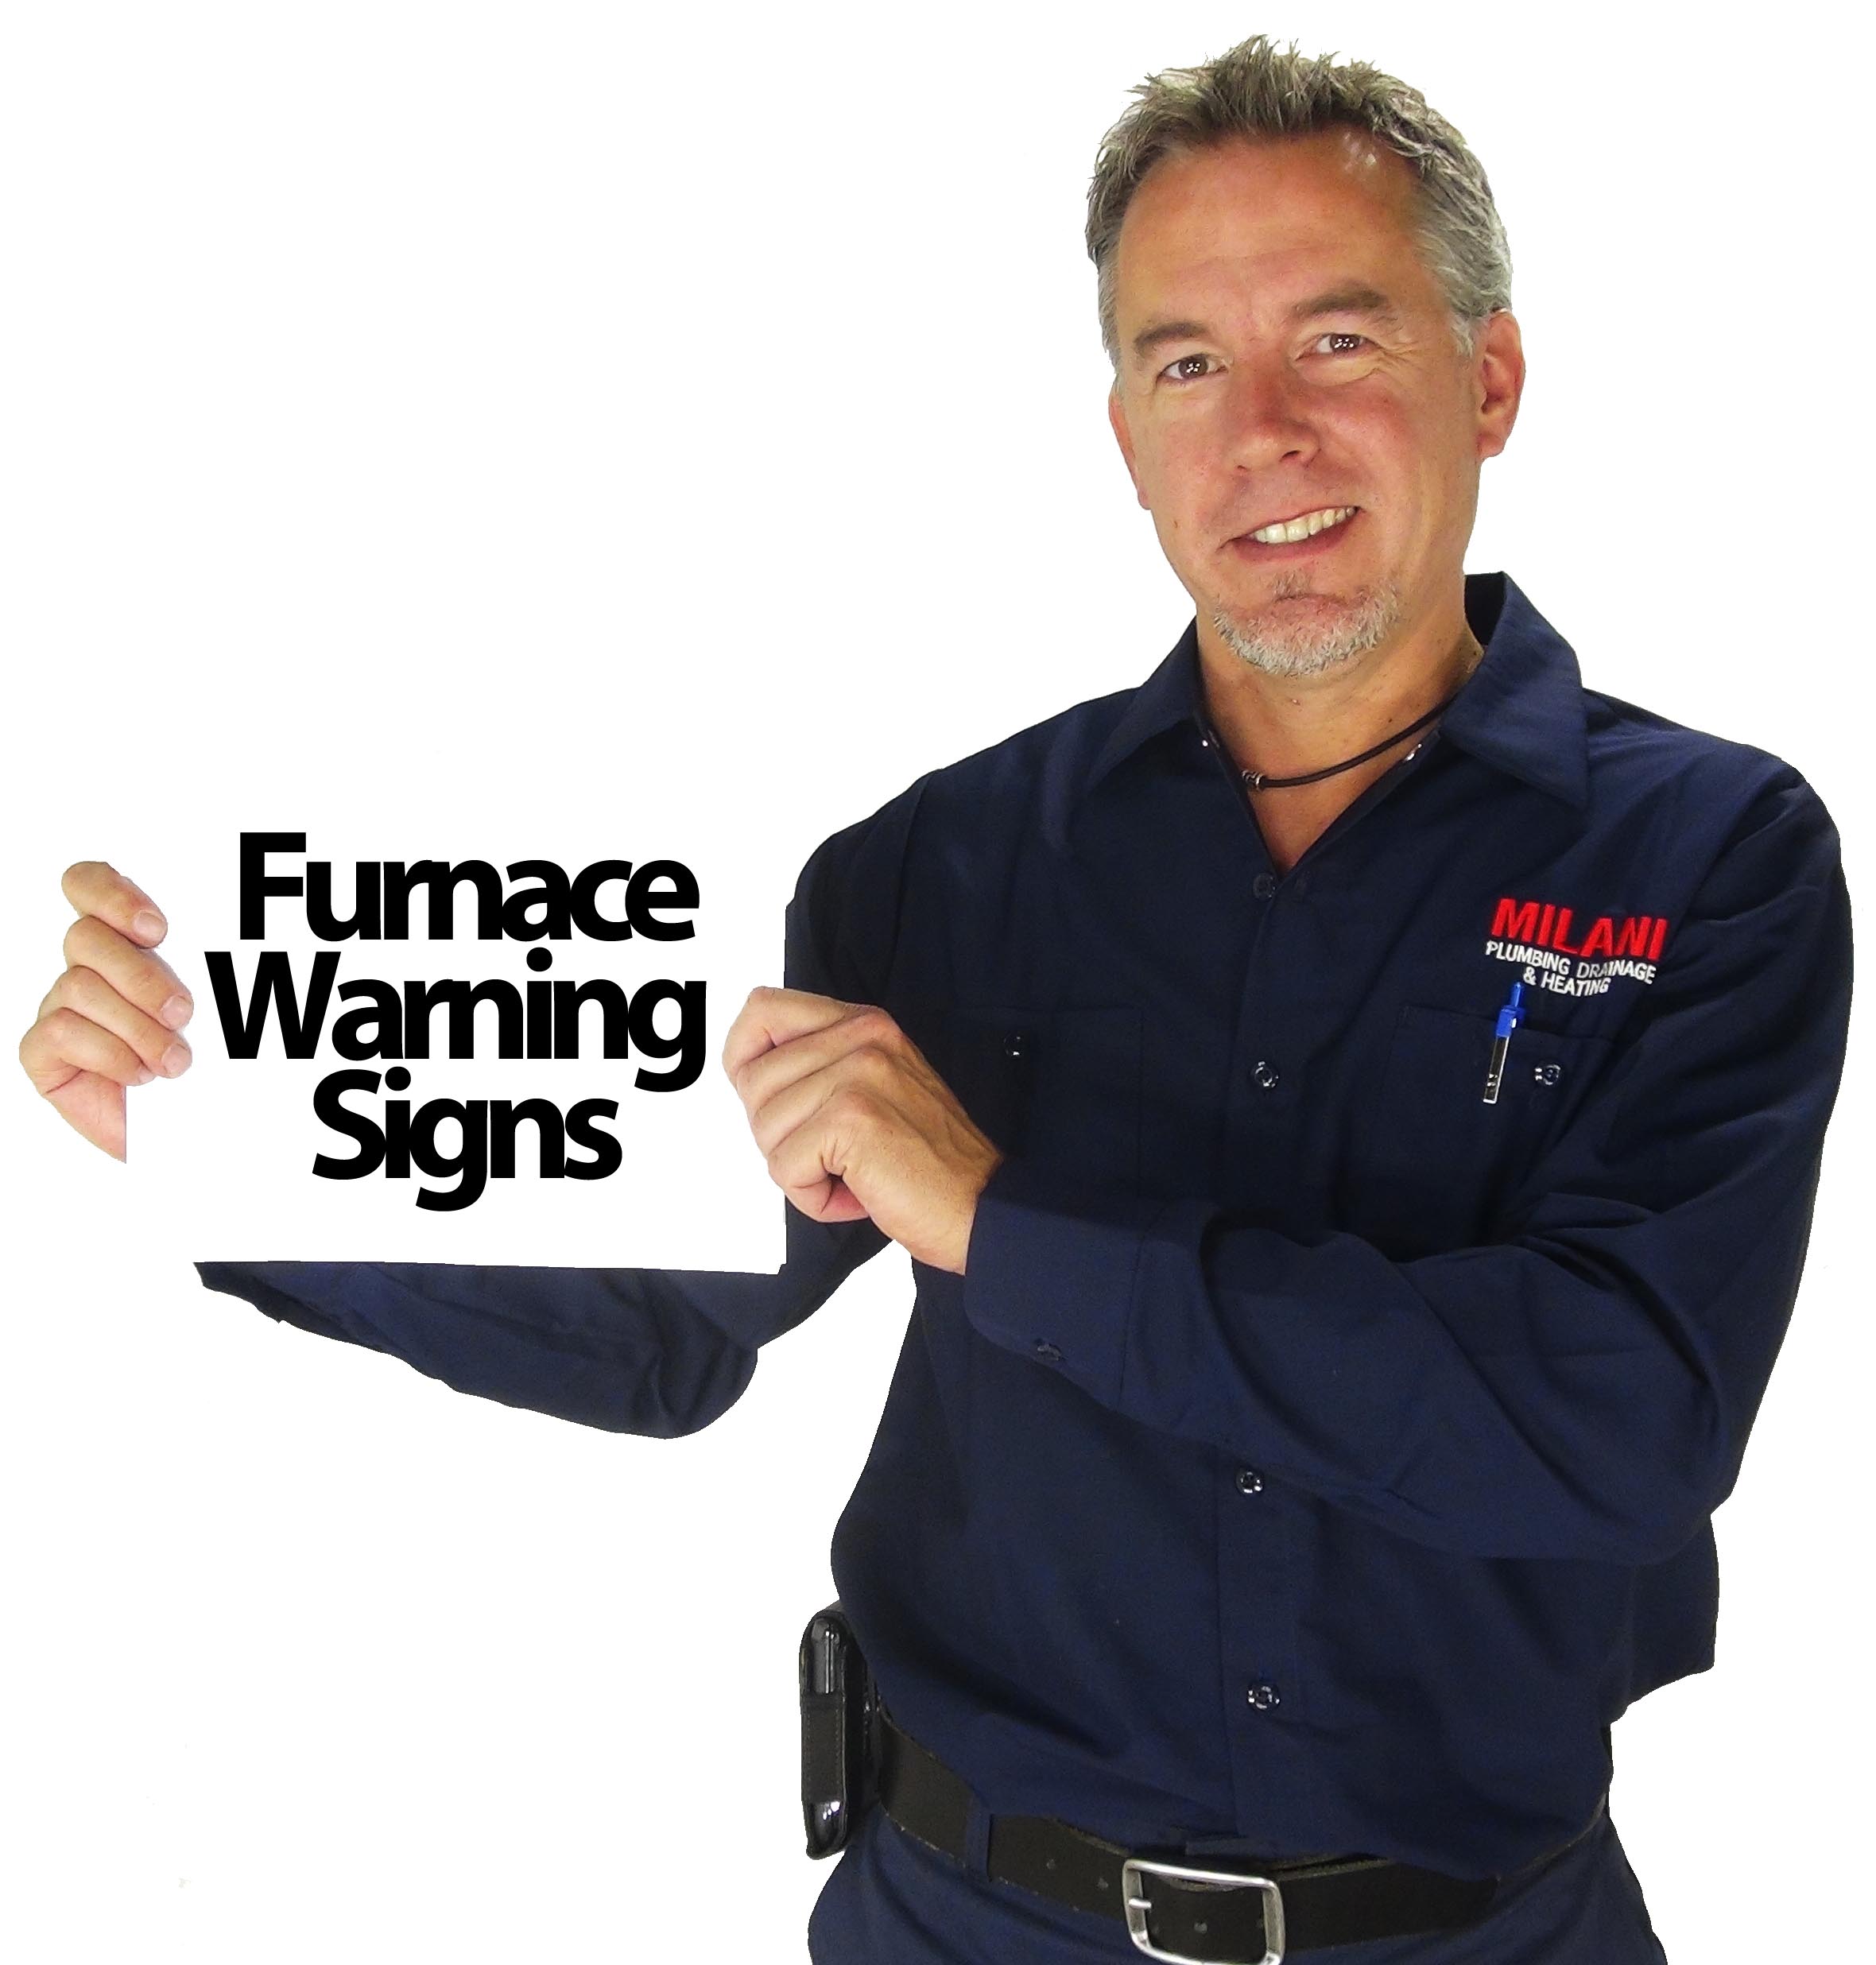 furnace warning signs graphic